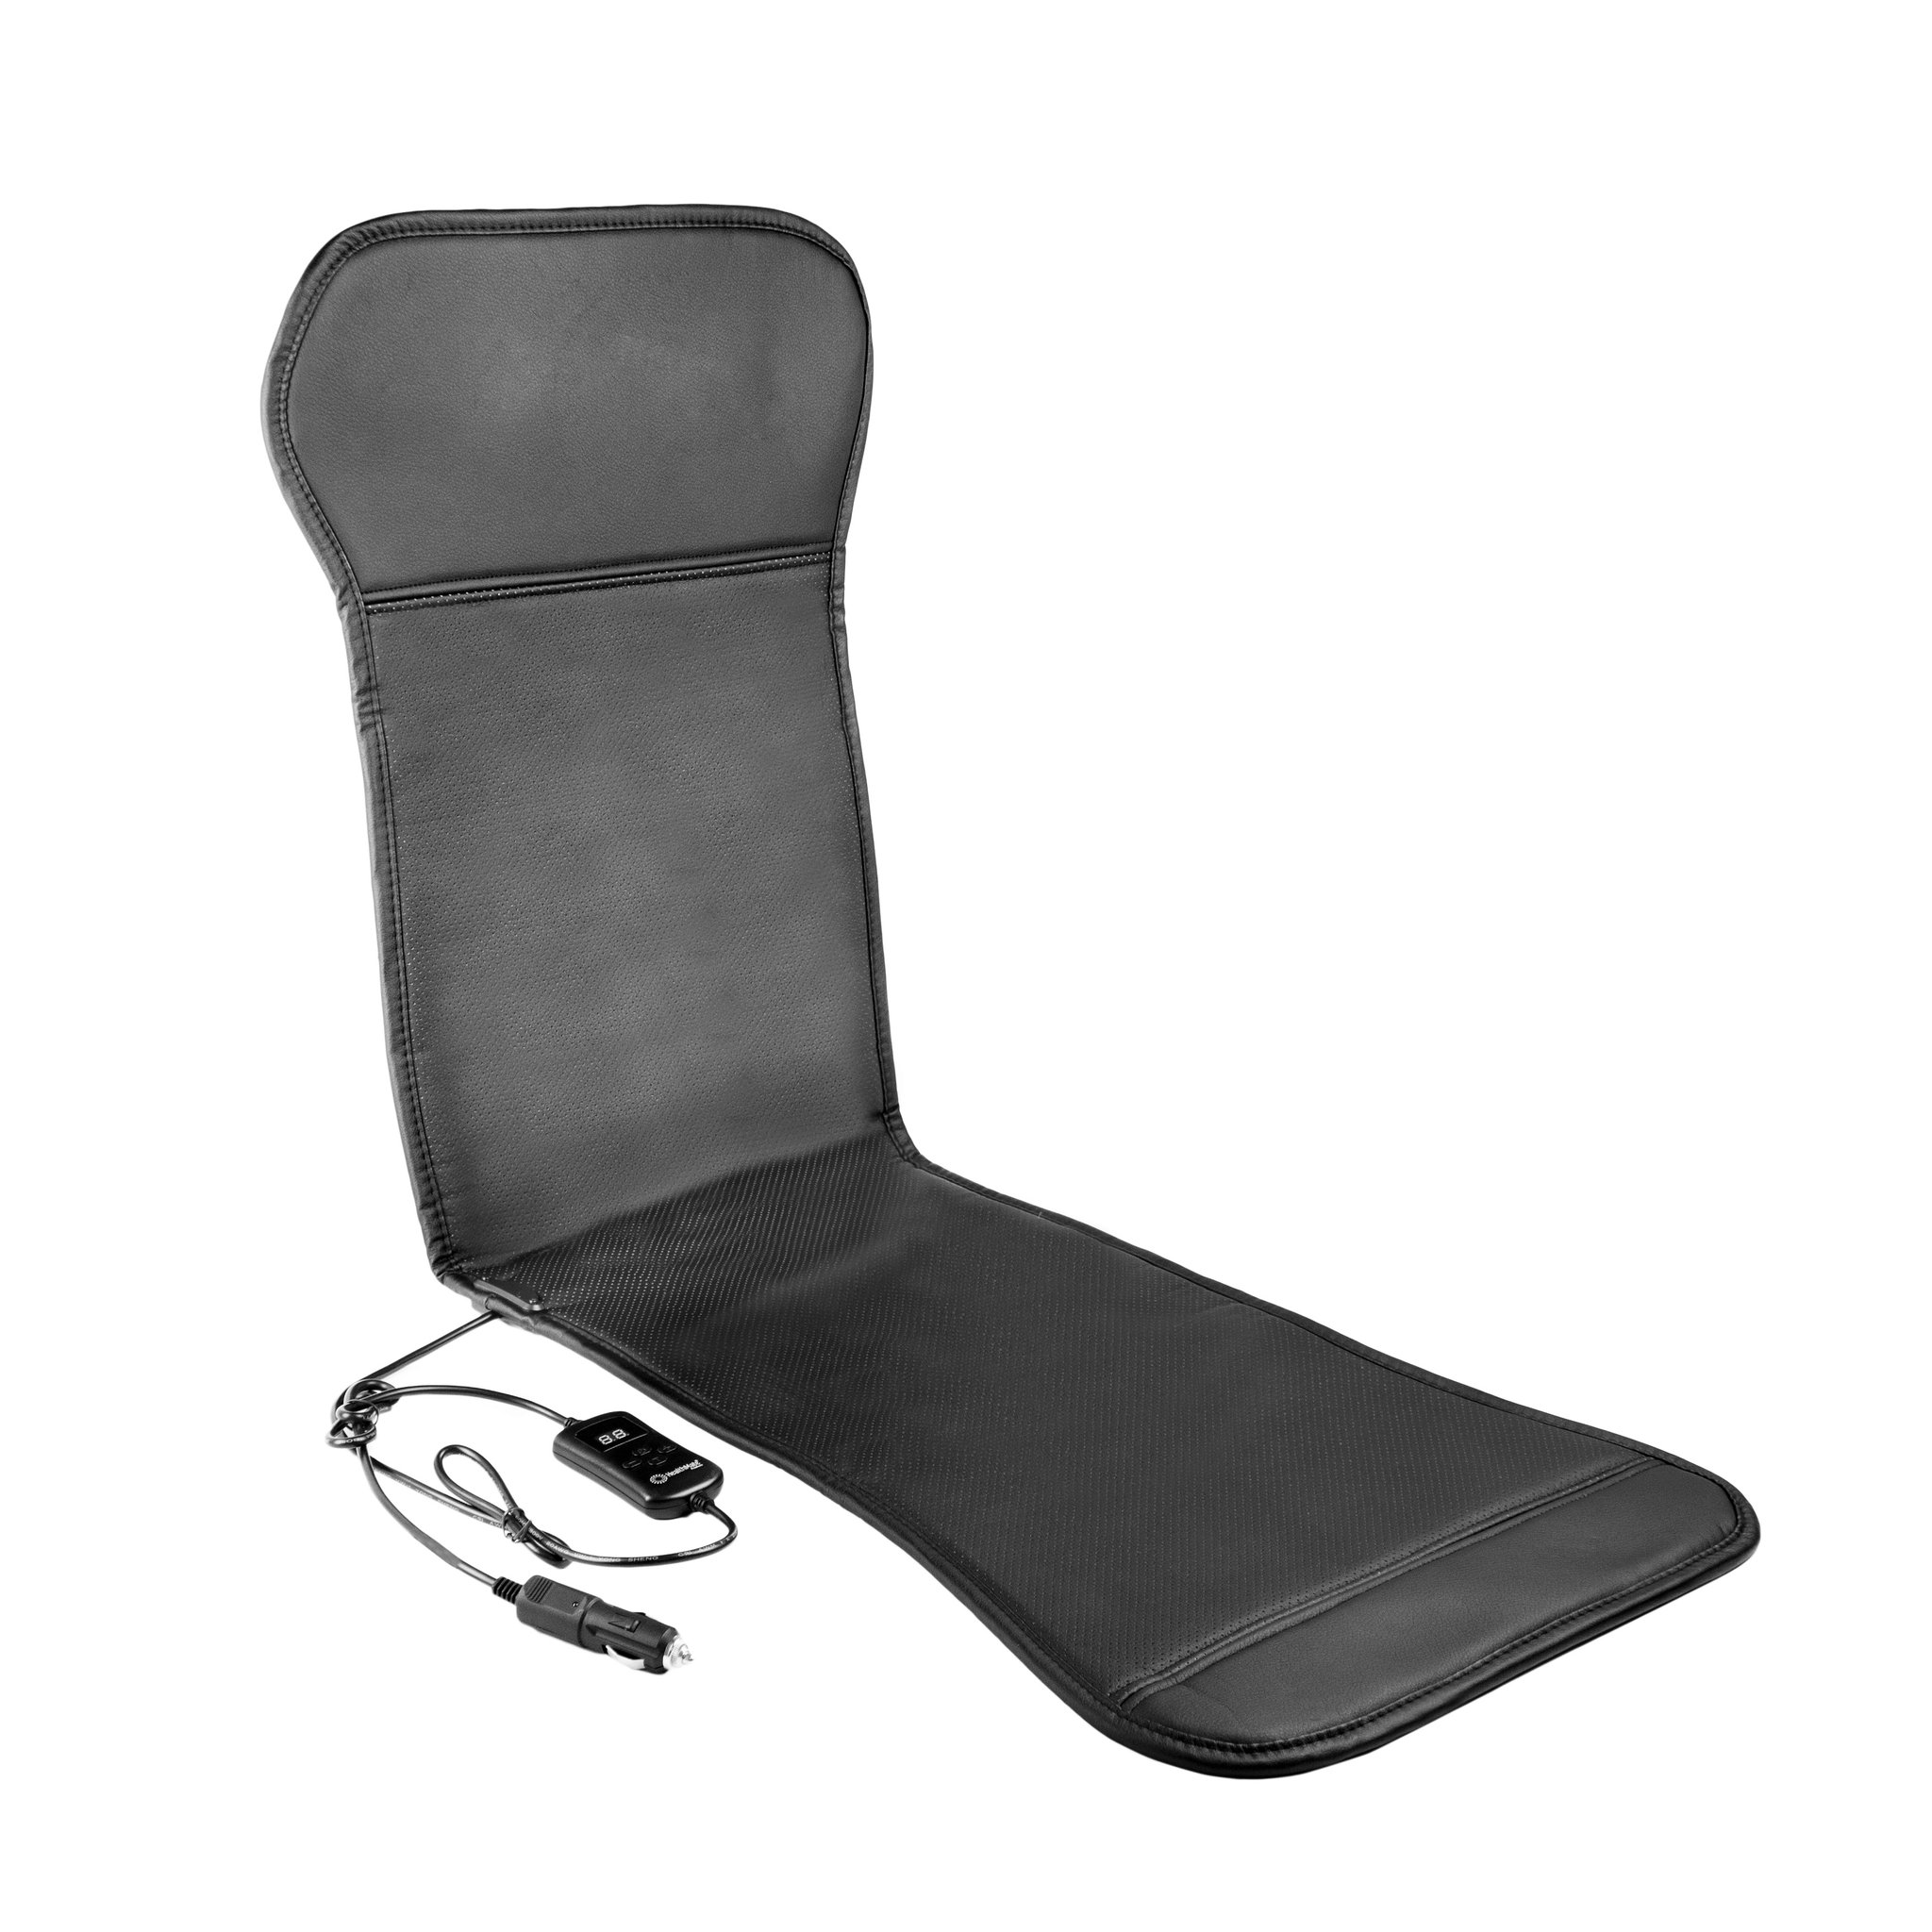 https://cs1.0ps.us/original/opplanet-wagan-auto-sport-heated-seat-cushion-black-one-size-in9449-main